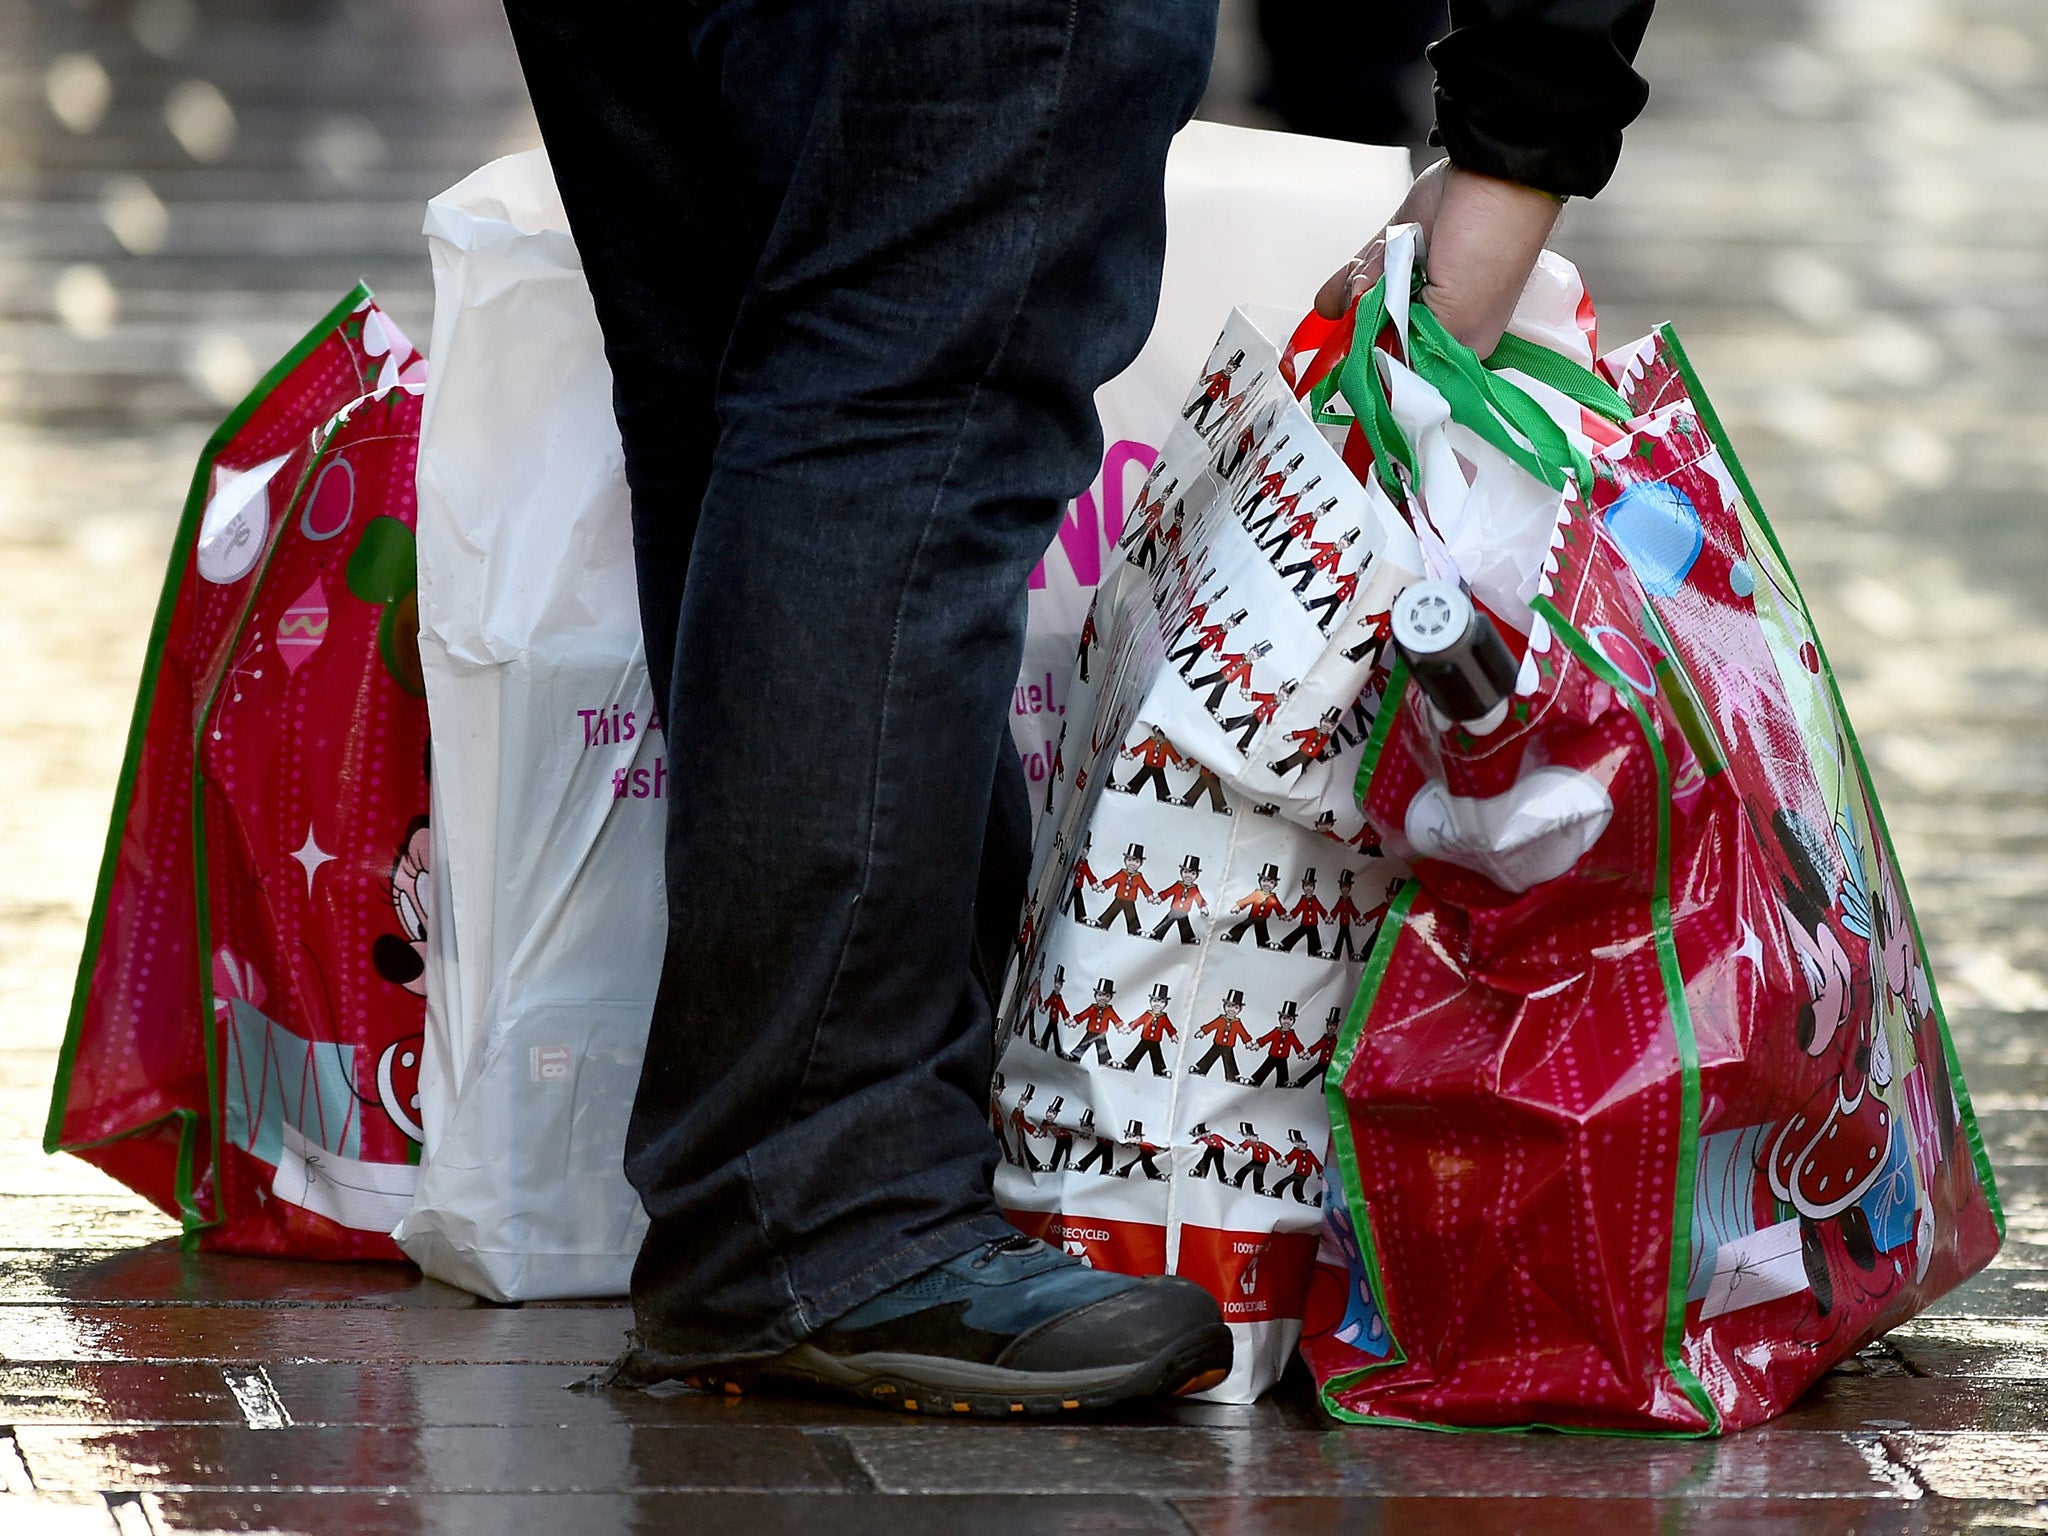 Shoppers look for Christmas gifts on the high street in Glasgow, Scotland.